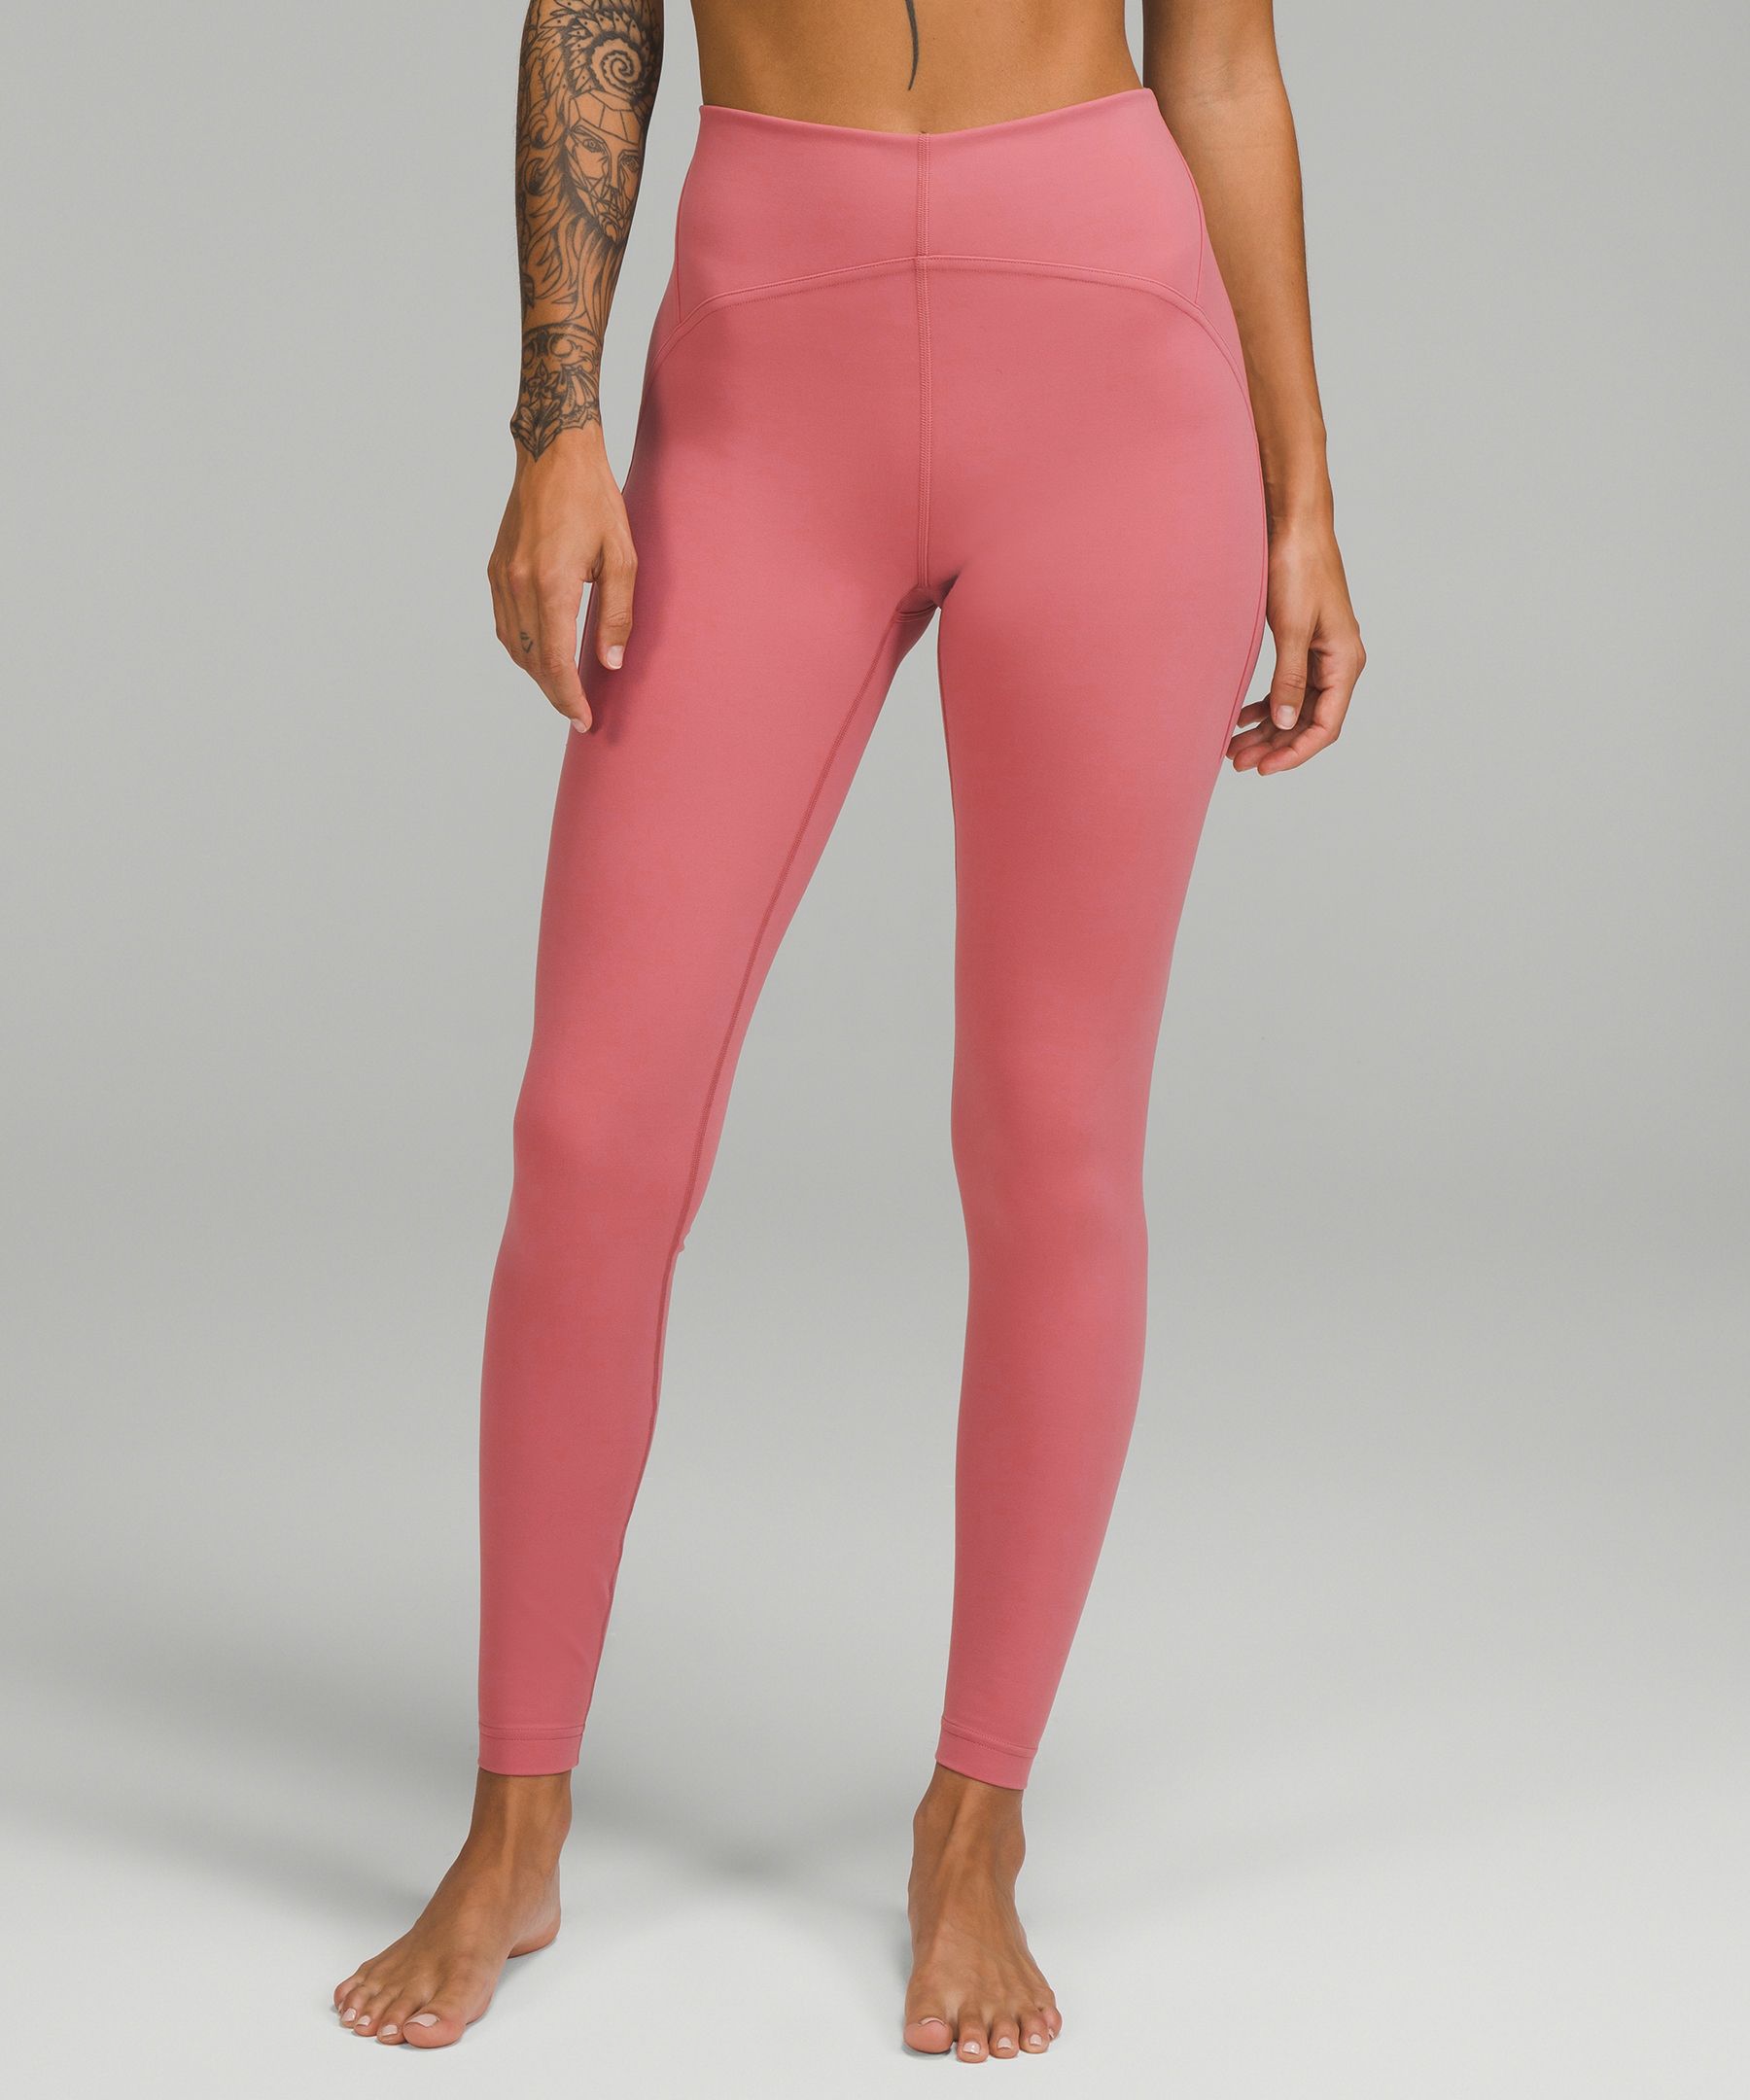 Instill legging- this is a size 0, please tell me why the ankles